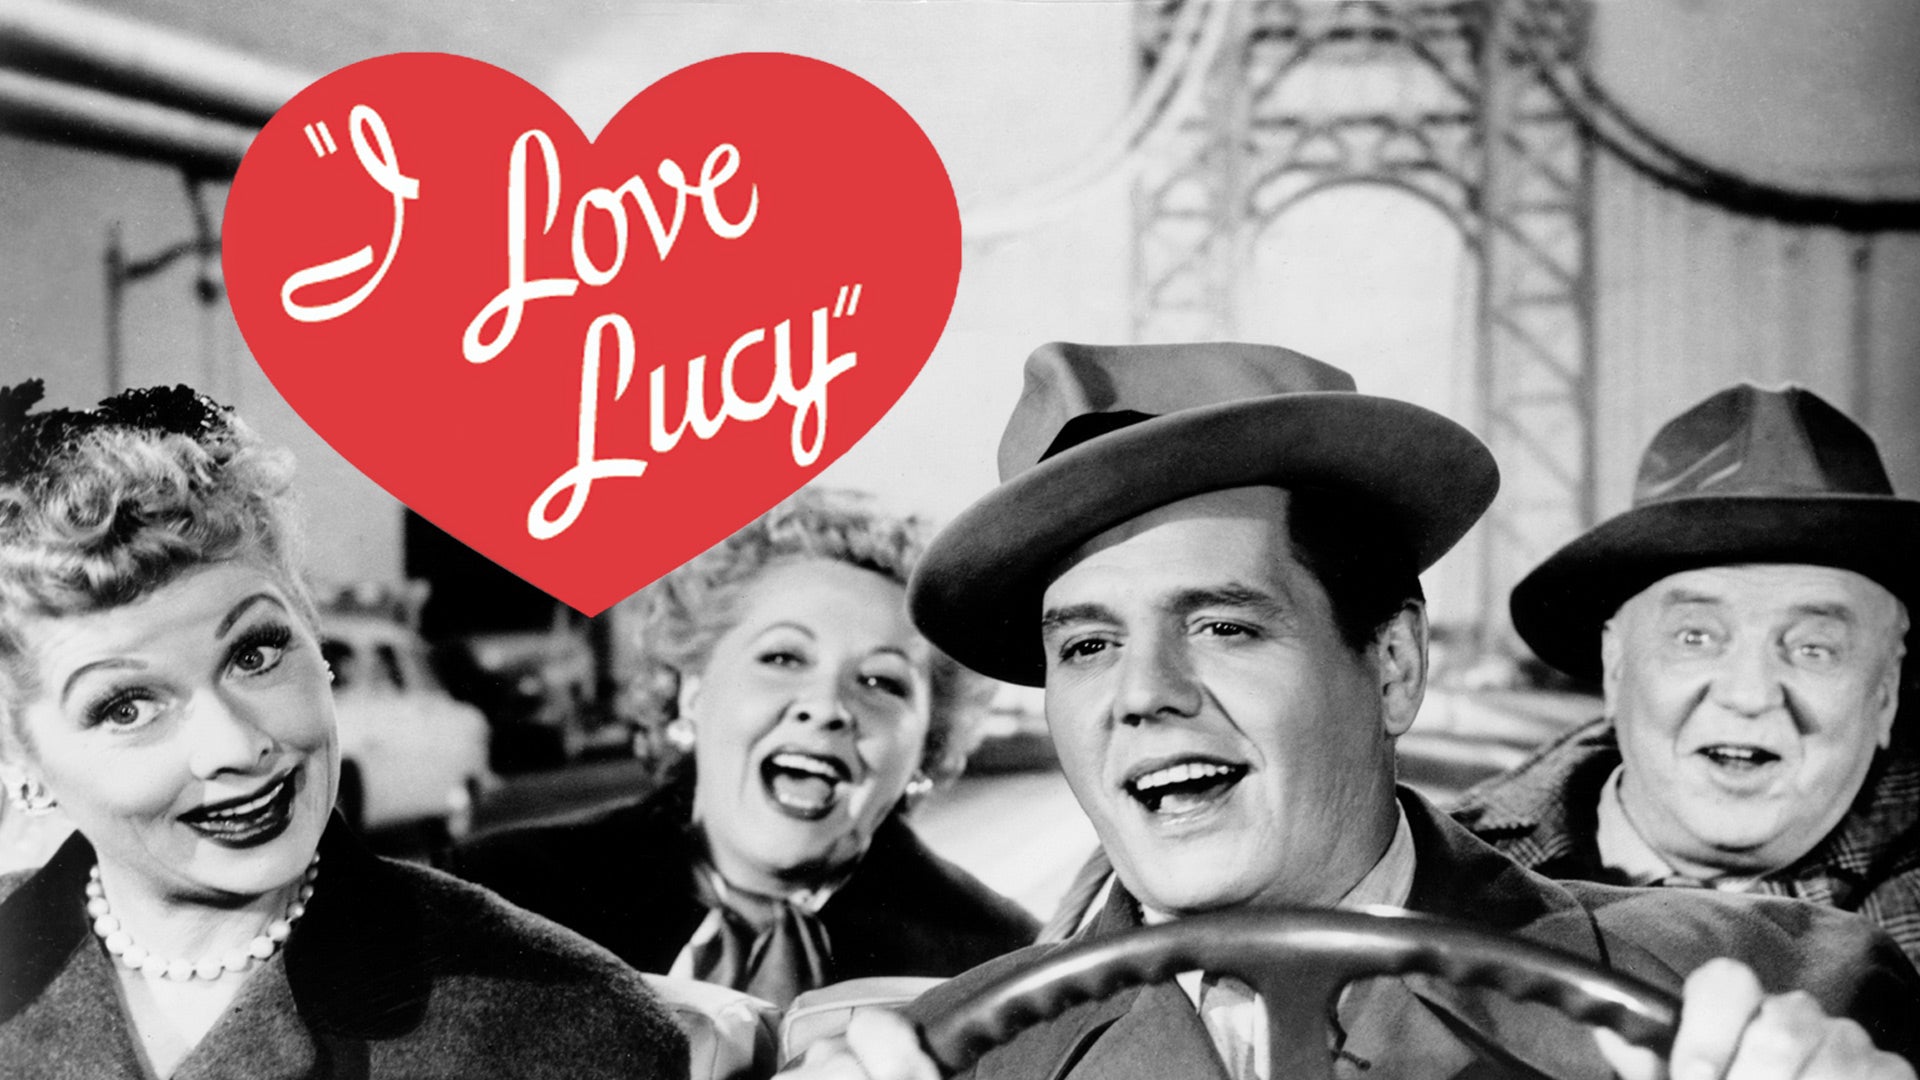 I Love Lucy: The Complete Series - Seasons 1-9